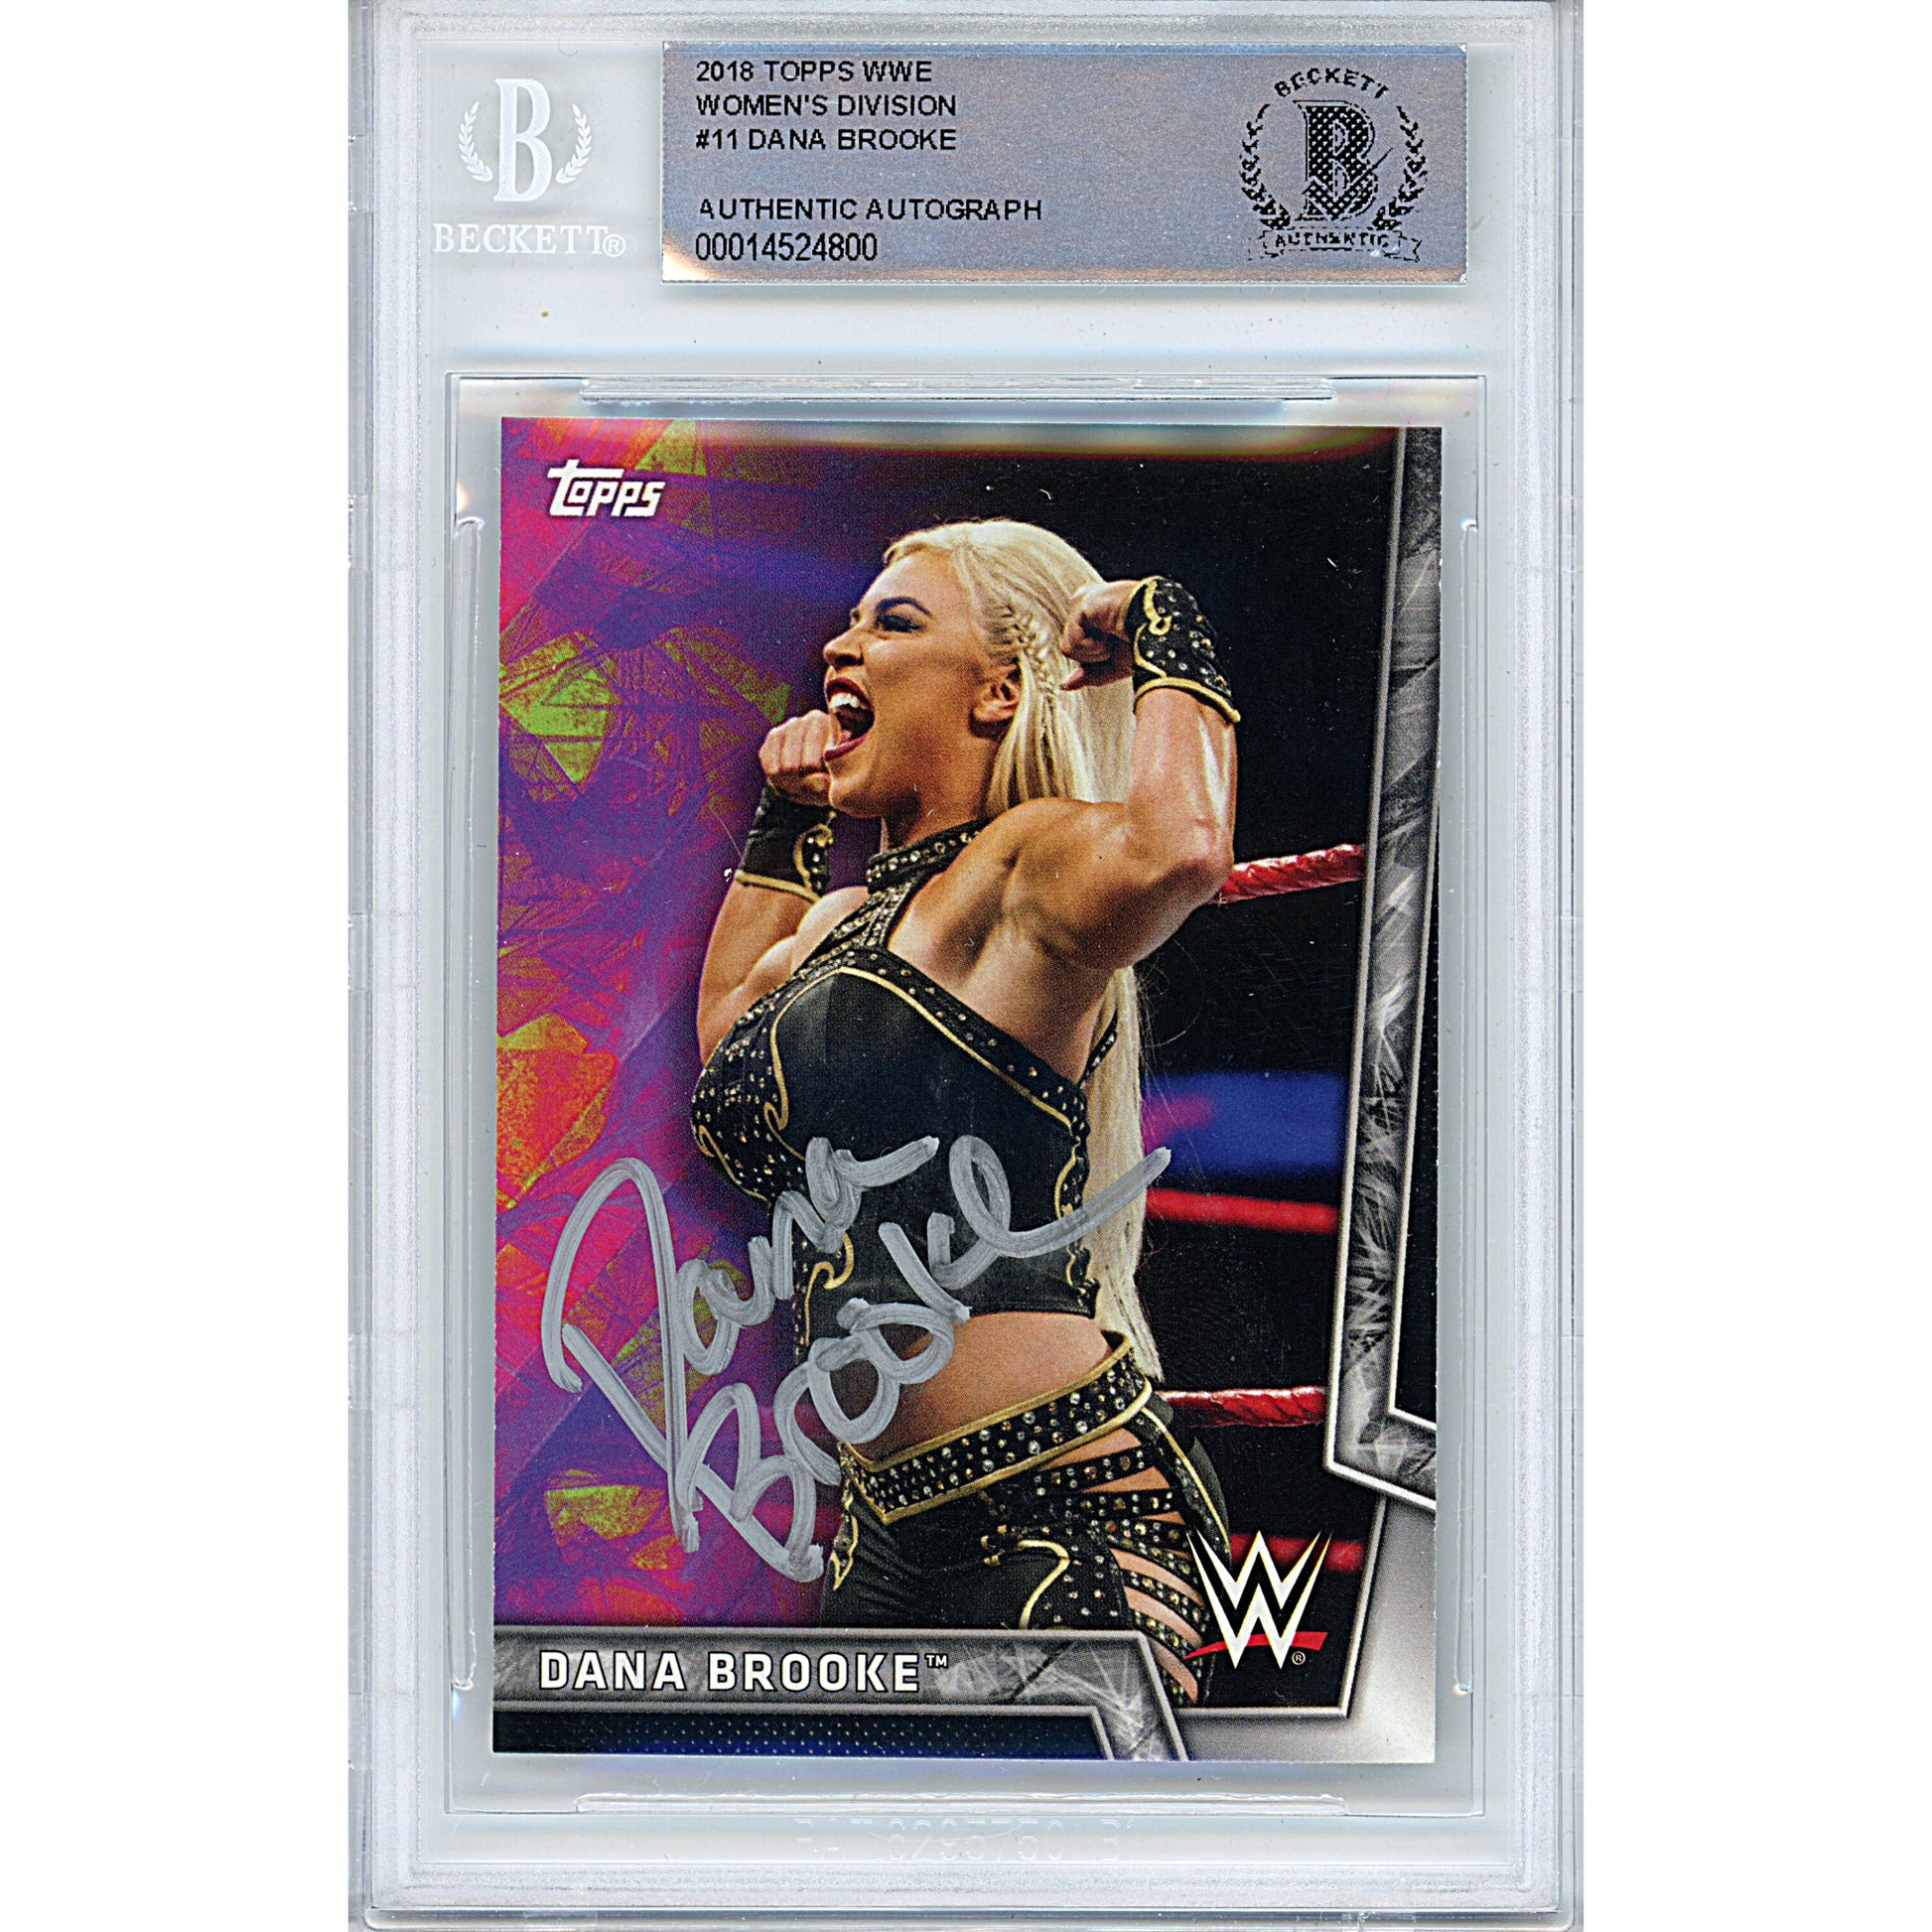 Wrestling- Autographed- Dana Brooke Signed 2018 Topps WWE Women's Division Wrestling Trading Card Beckett Authentication Slabbed 00014524800 - 101